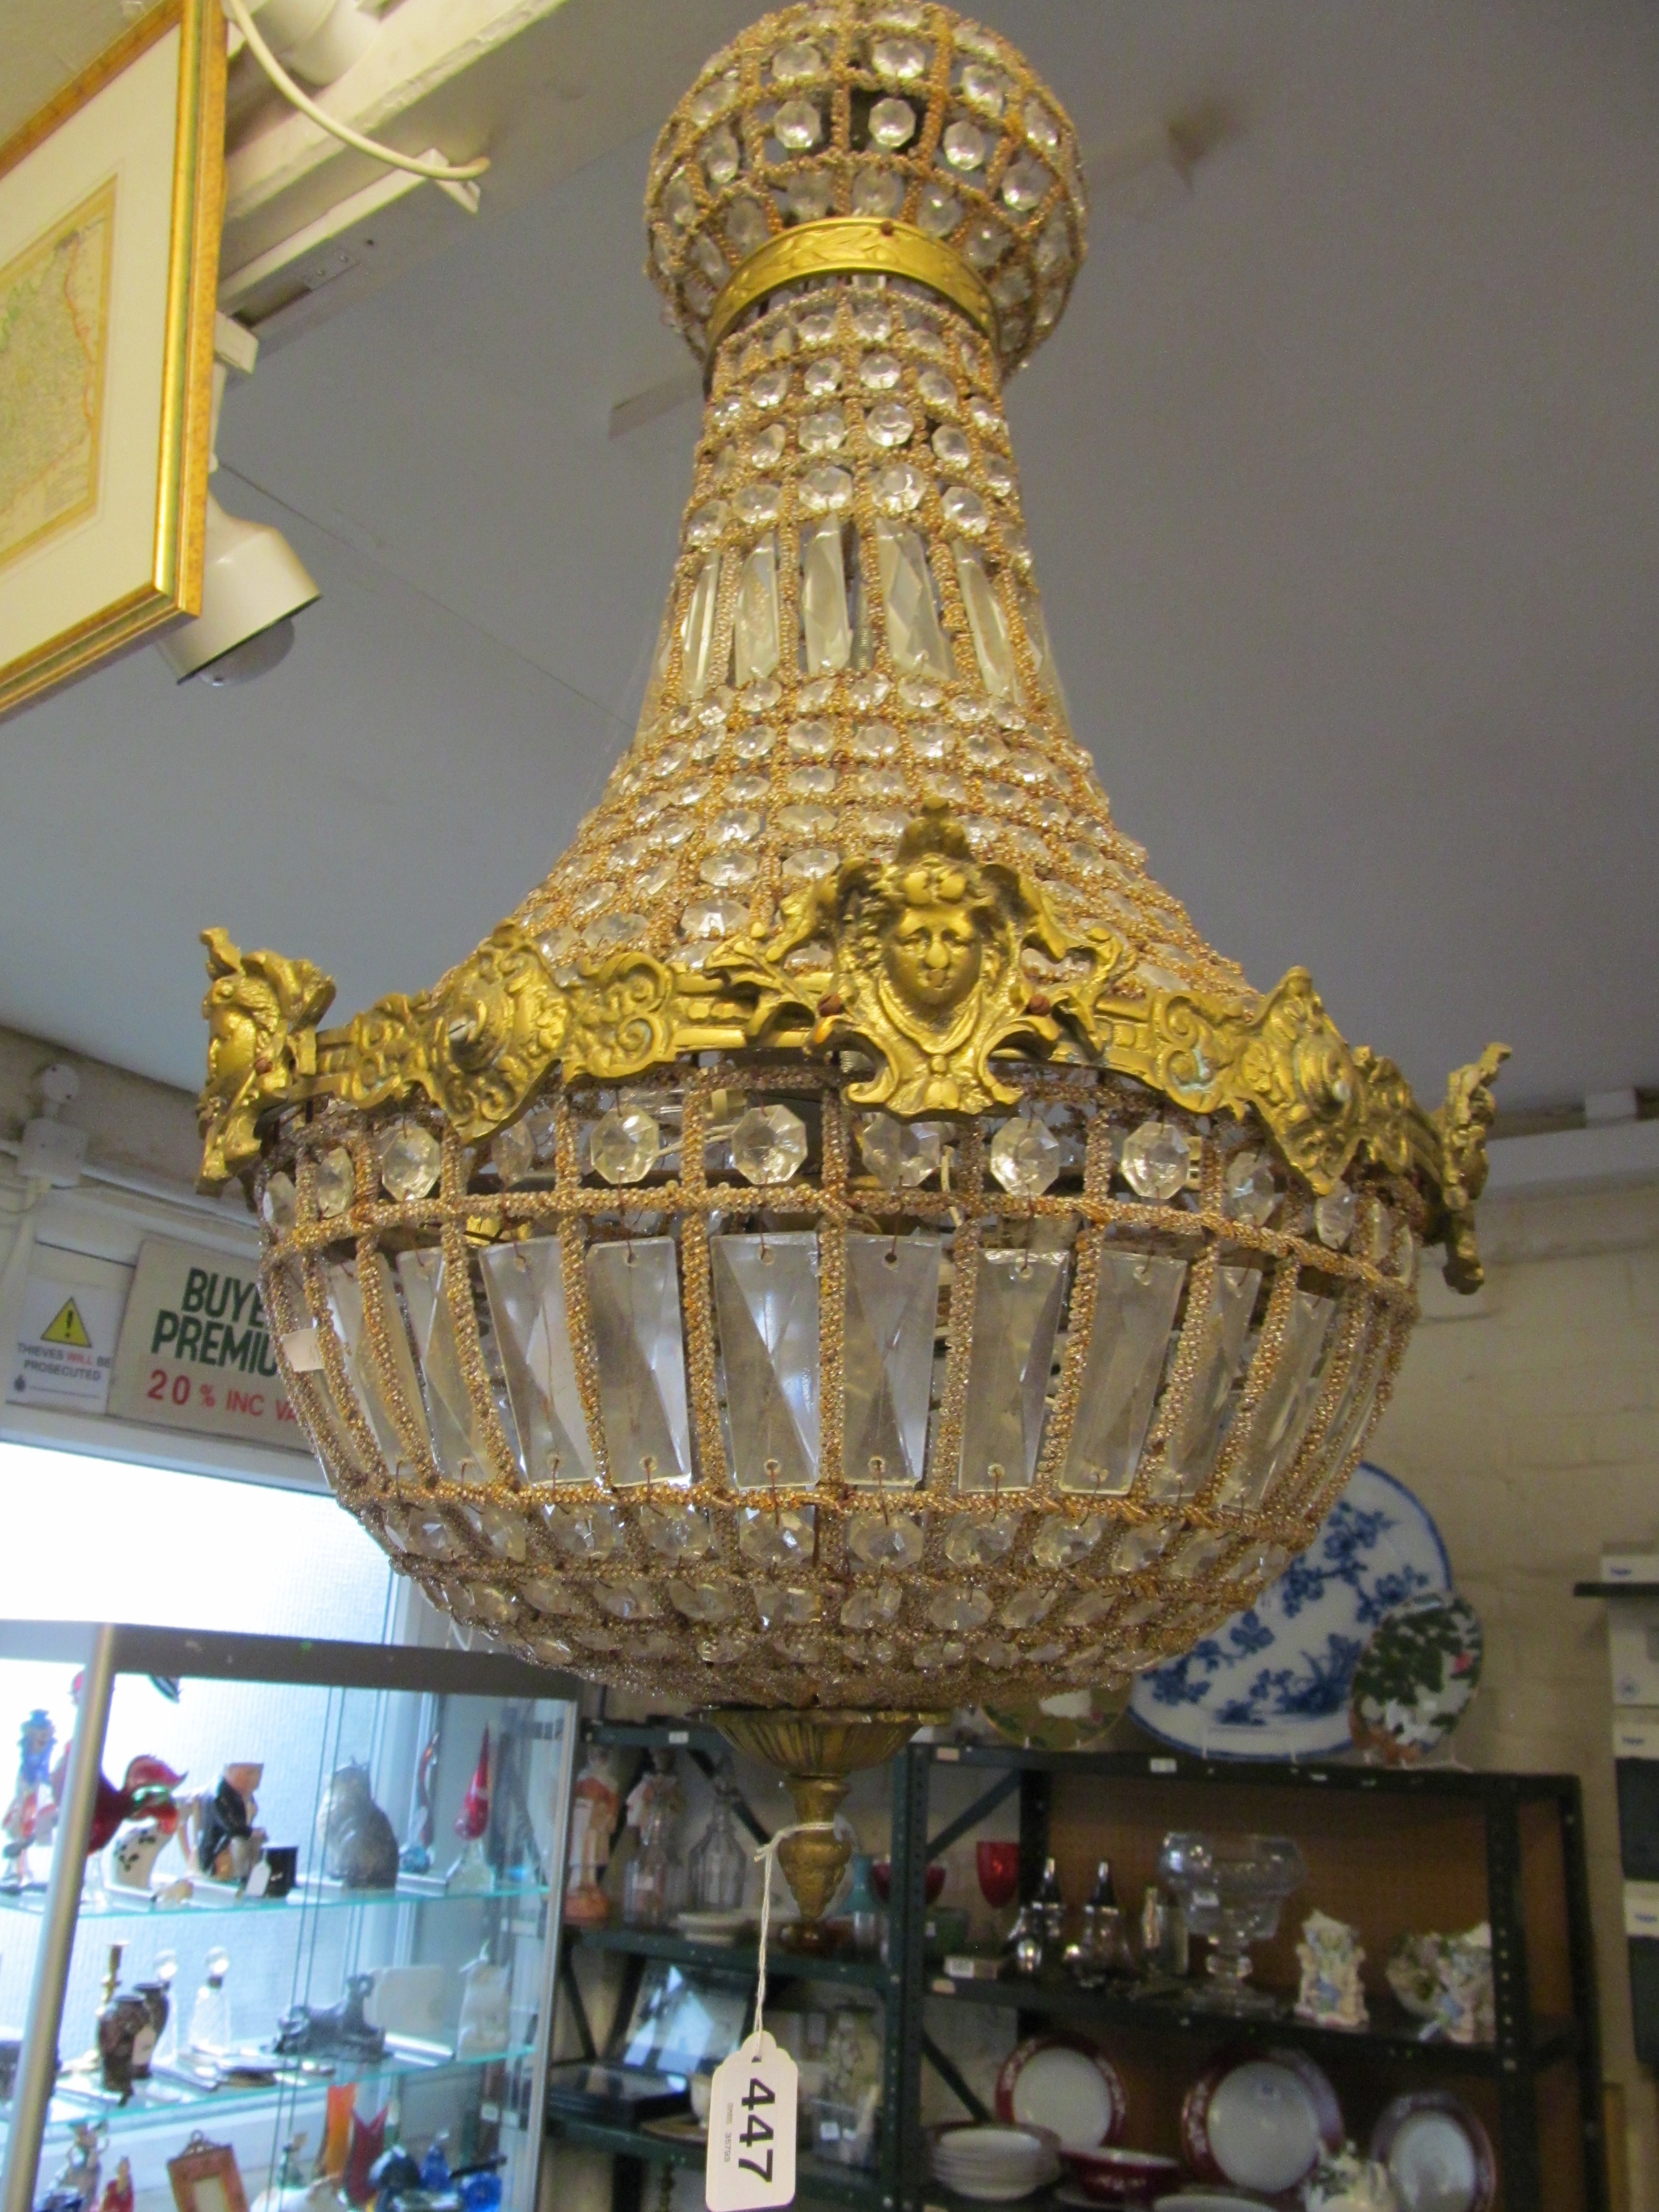 A chandelier with dome base.